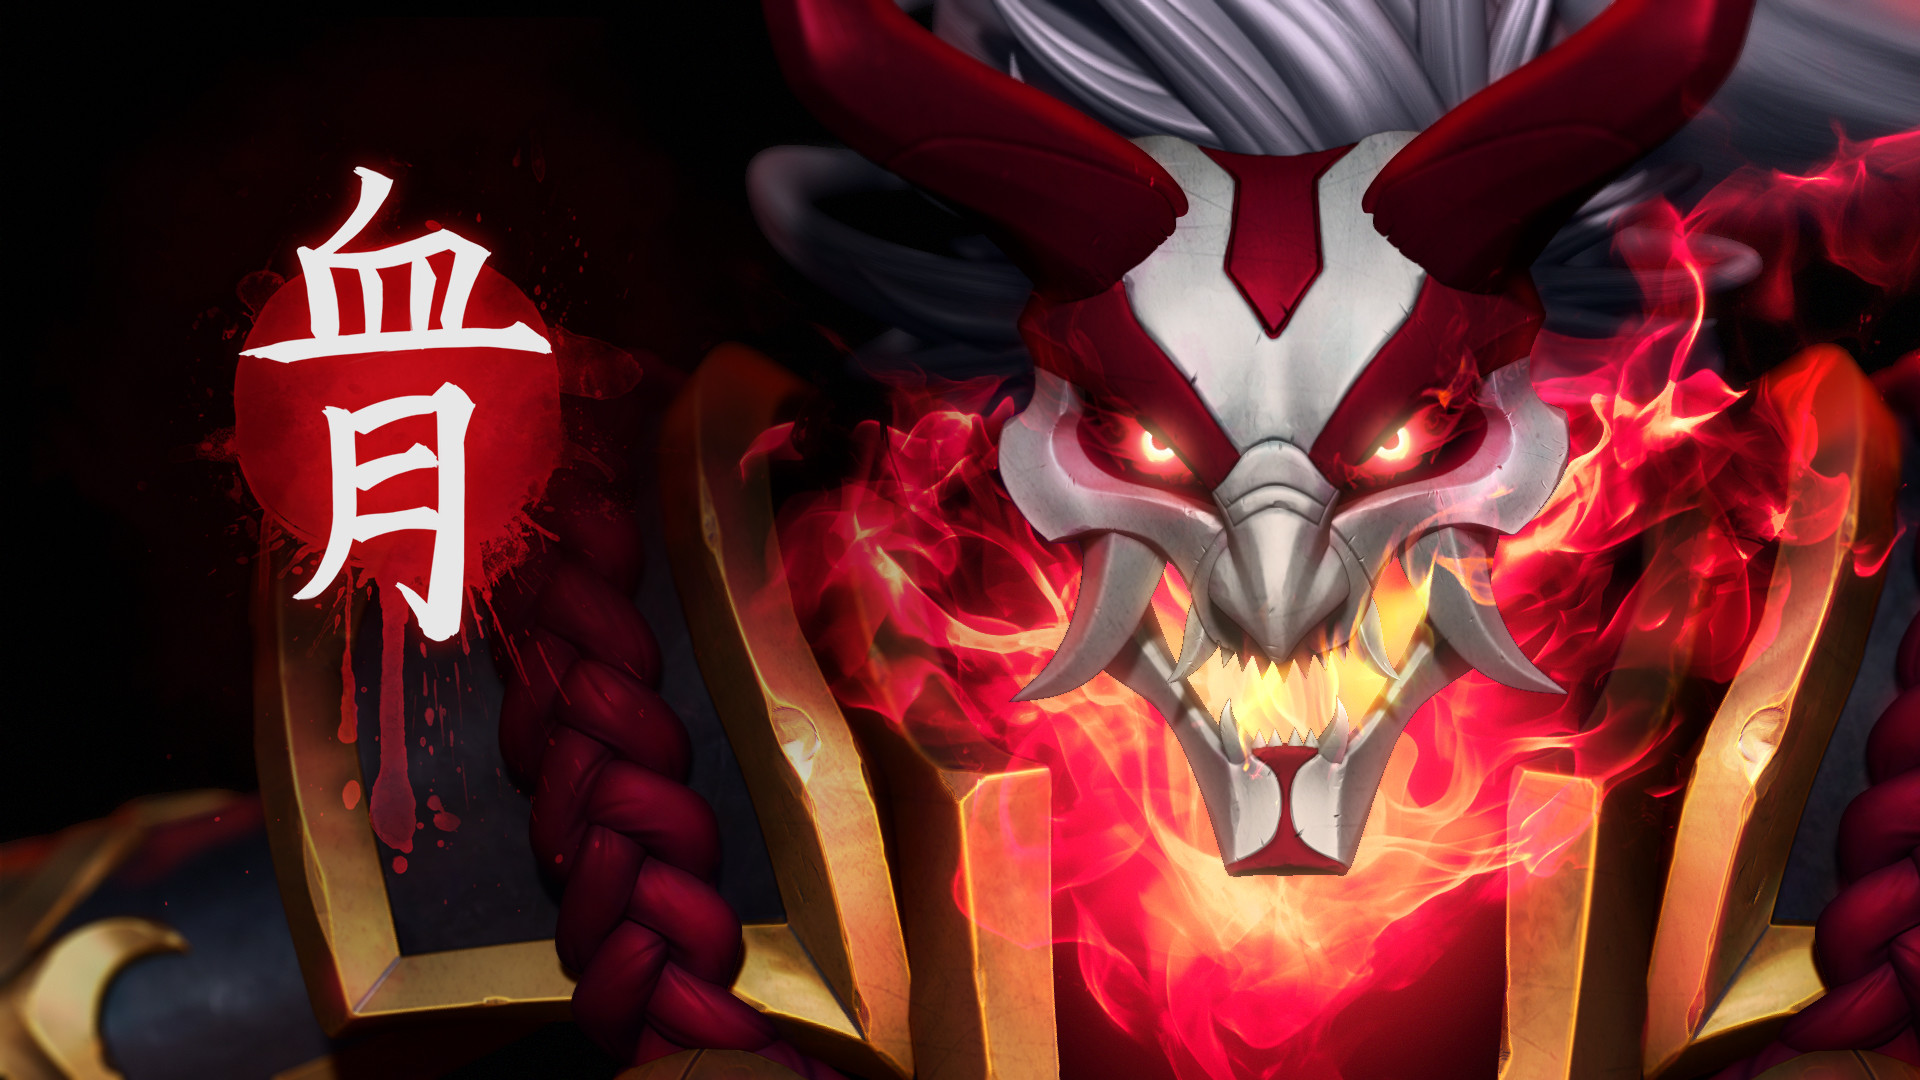 1920x1080 ... The Blood Moon Rises Wallpaper by Fch3ck